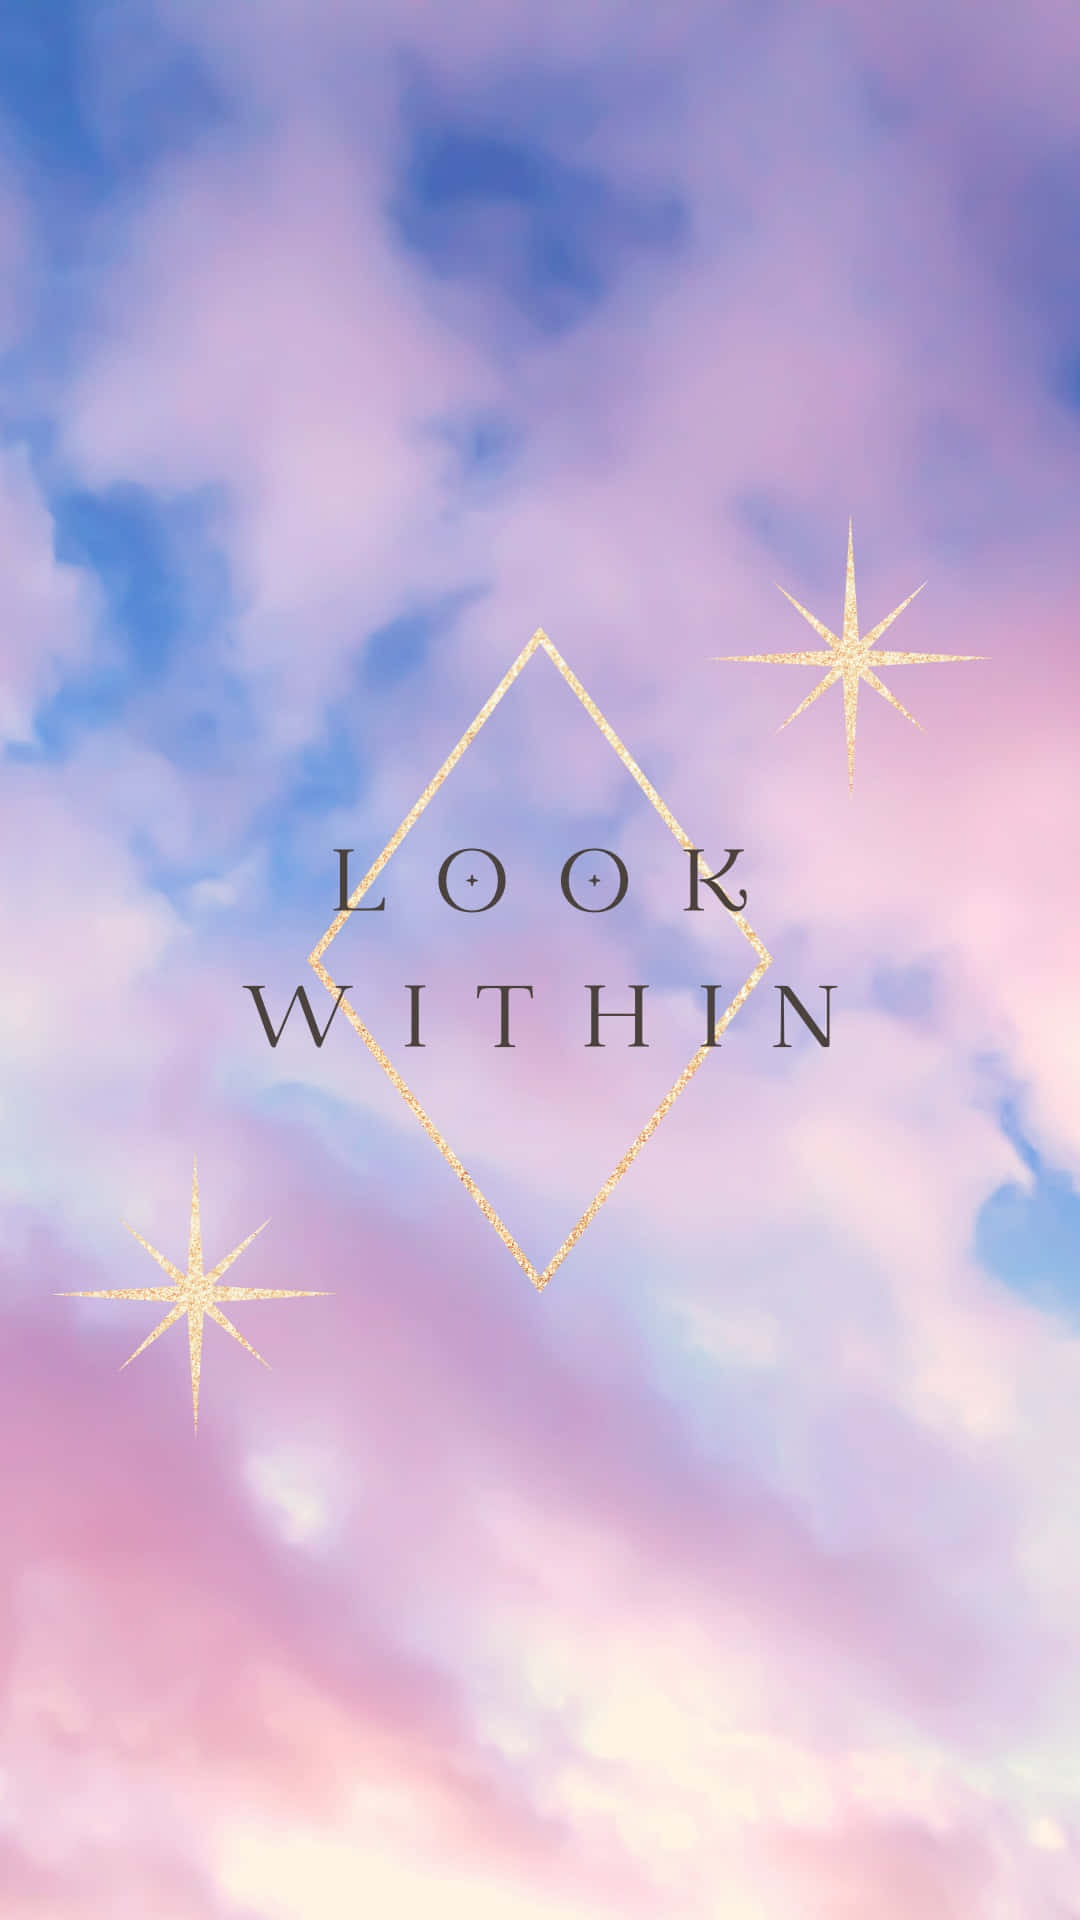 Look Within - A Pink Sky With Stars